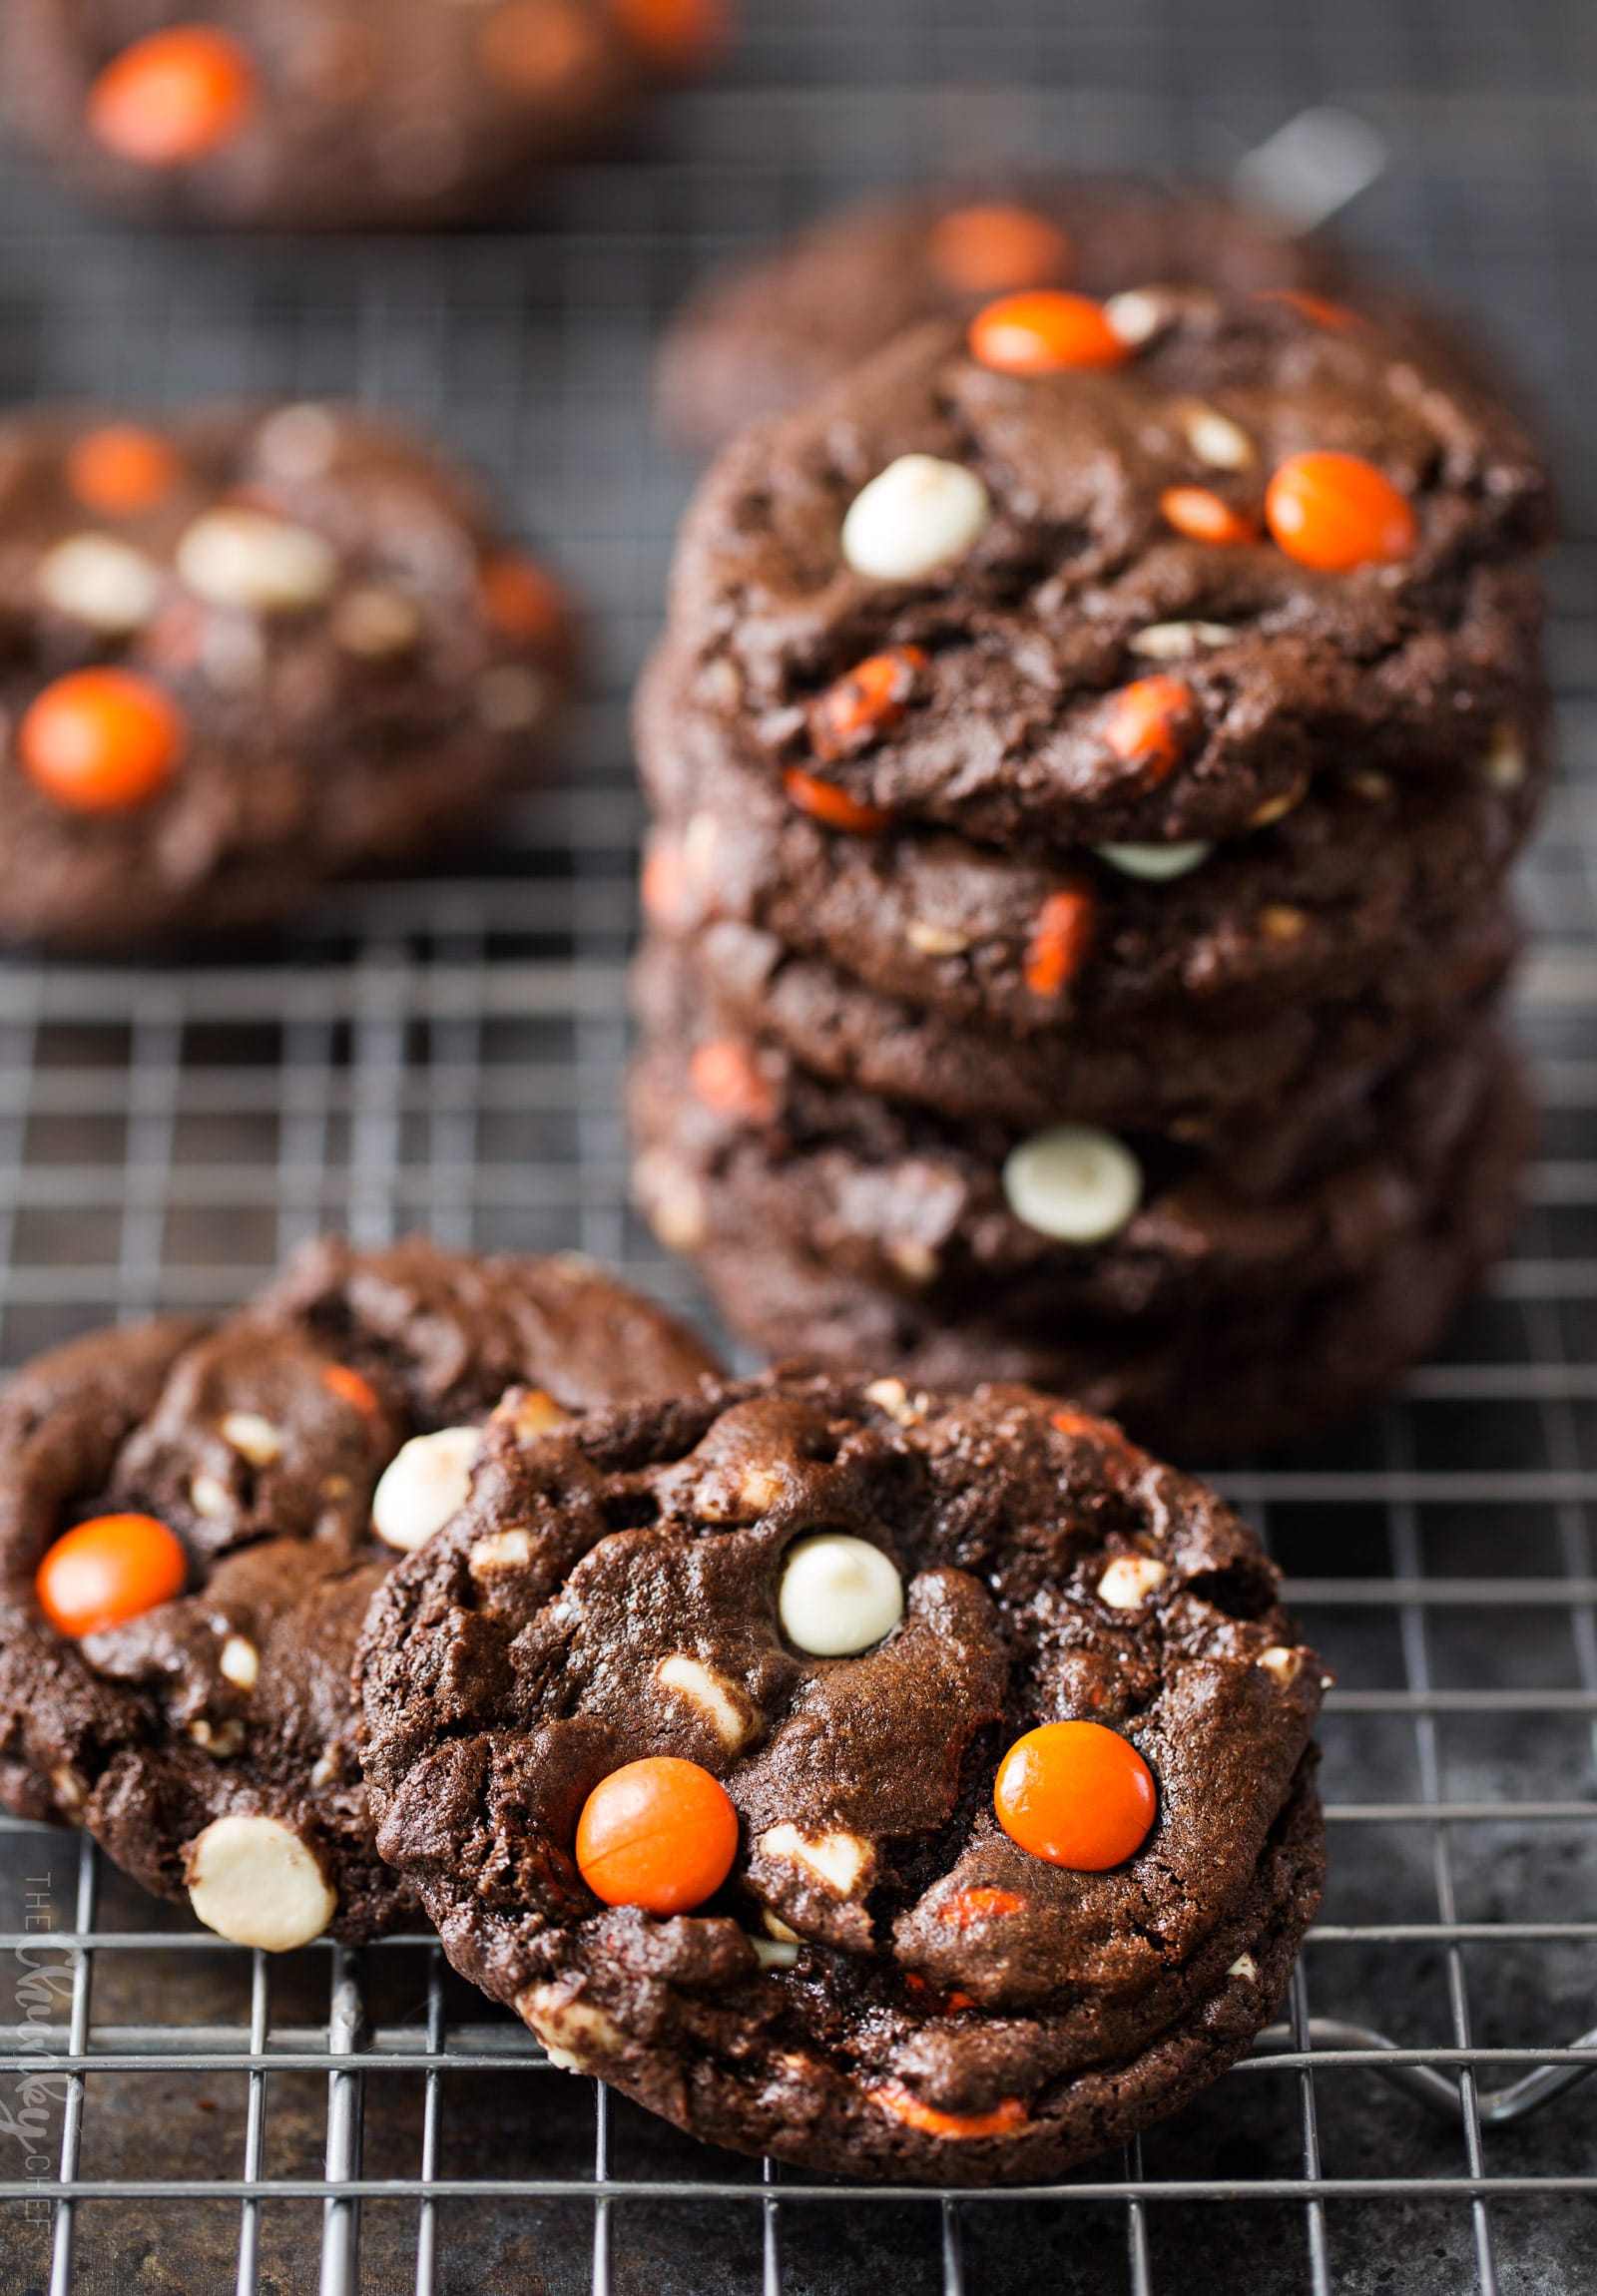 Peanut Butter Candy Double Chocolate Cookies | Fudgy and chewy double chocolate cookies, studded with white chocolate chips and Reese's pieces candies, which give them a fun Halloween look! | https://www.thechunkychef.com | #cookies #holiday #chocolate #baking